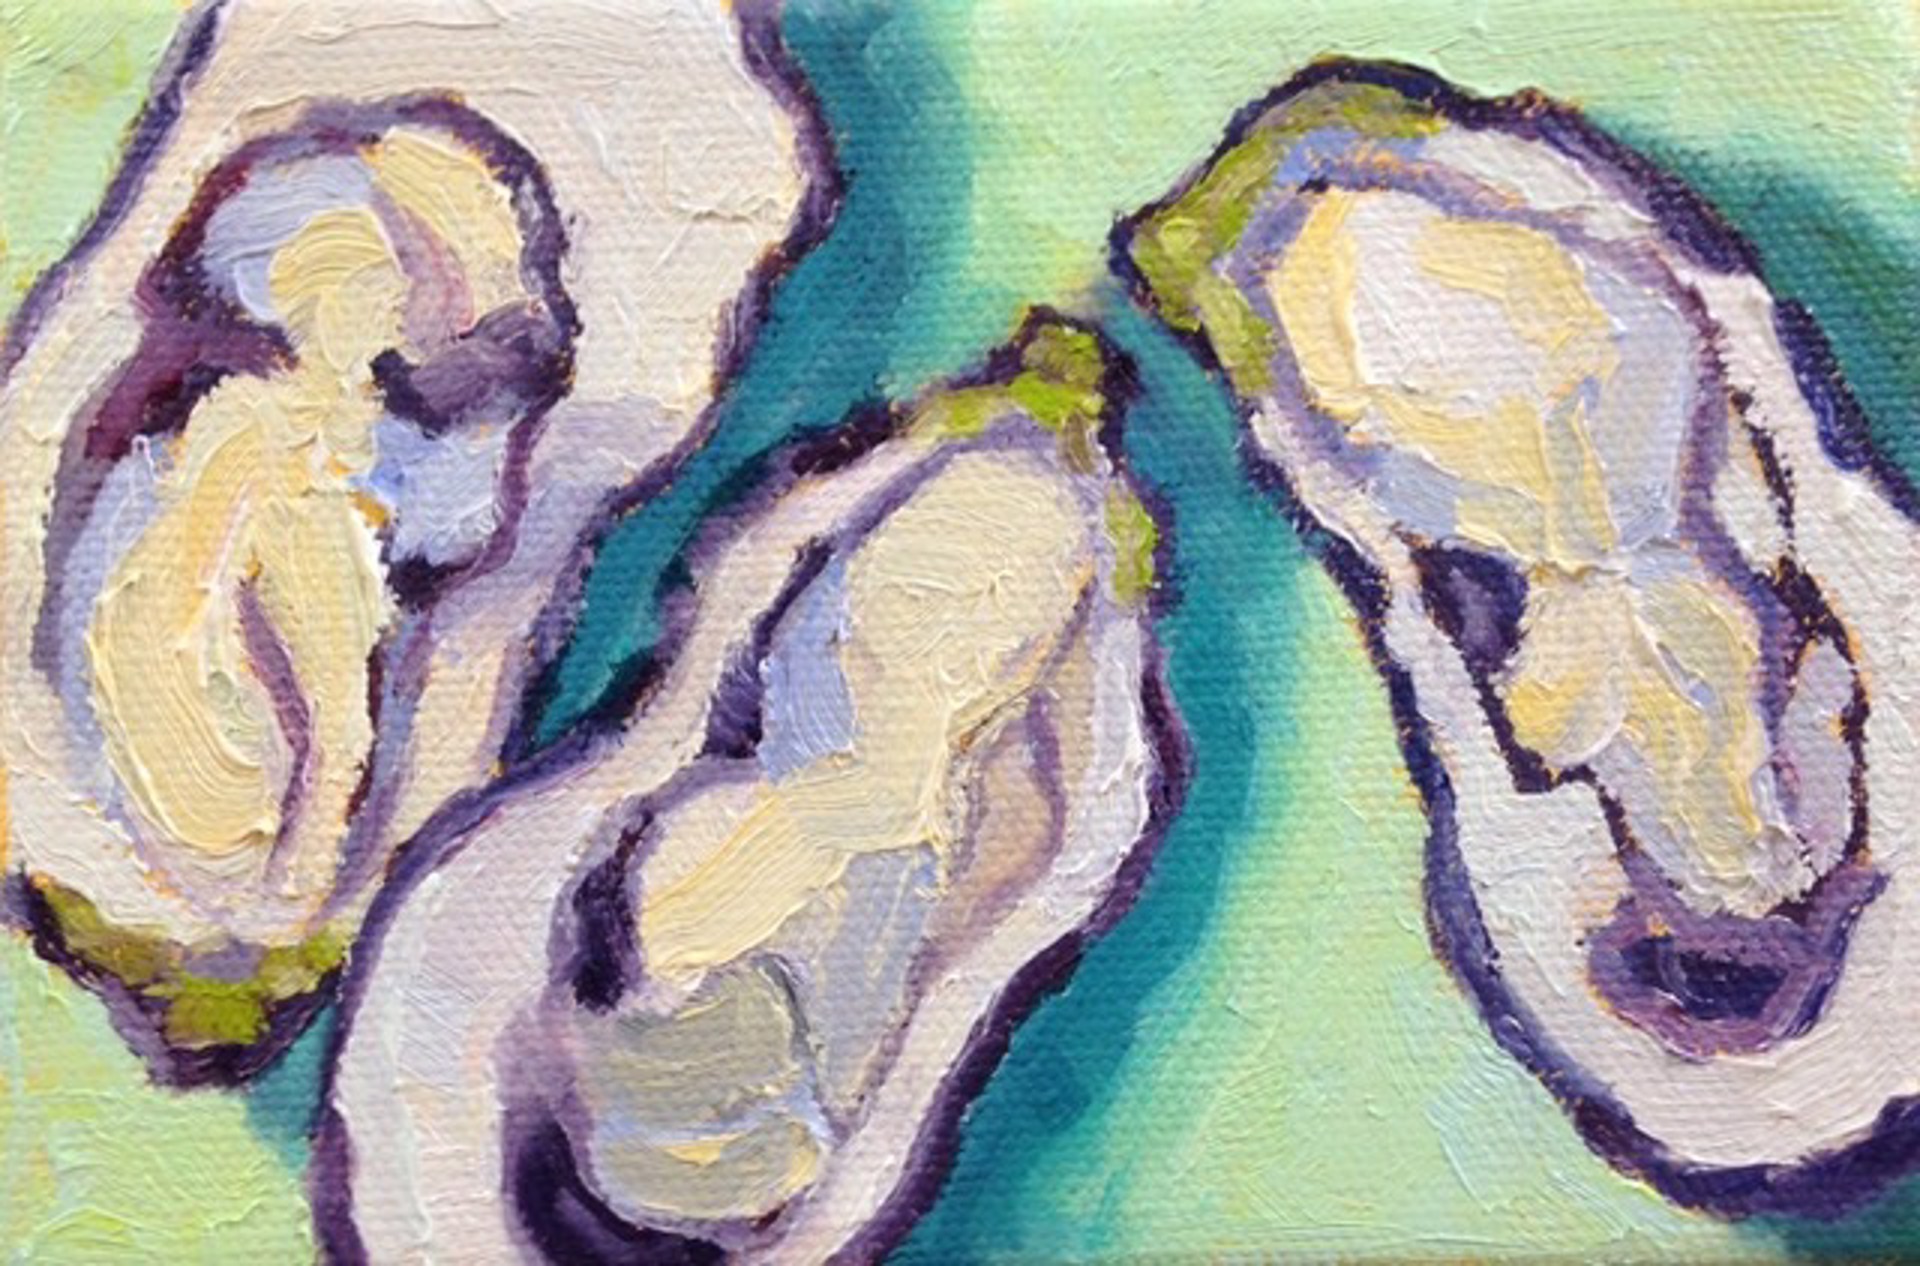 Three Oysters by Pat Doherty